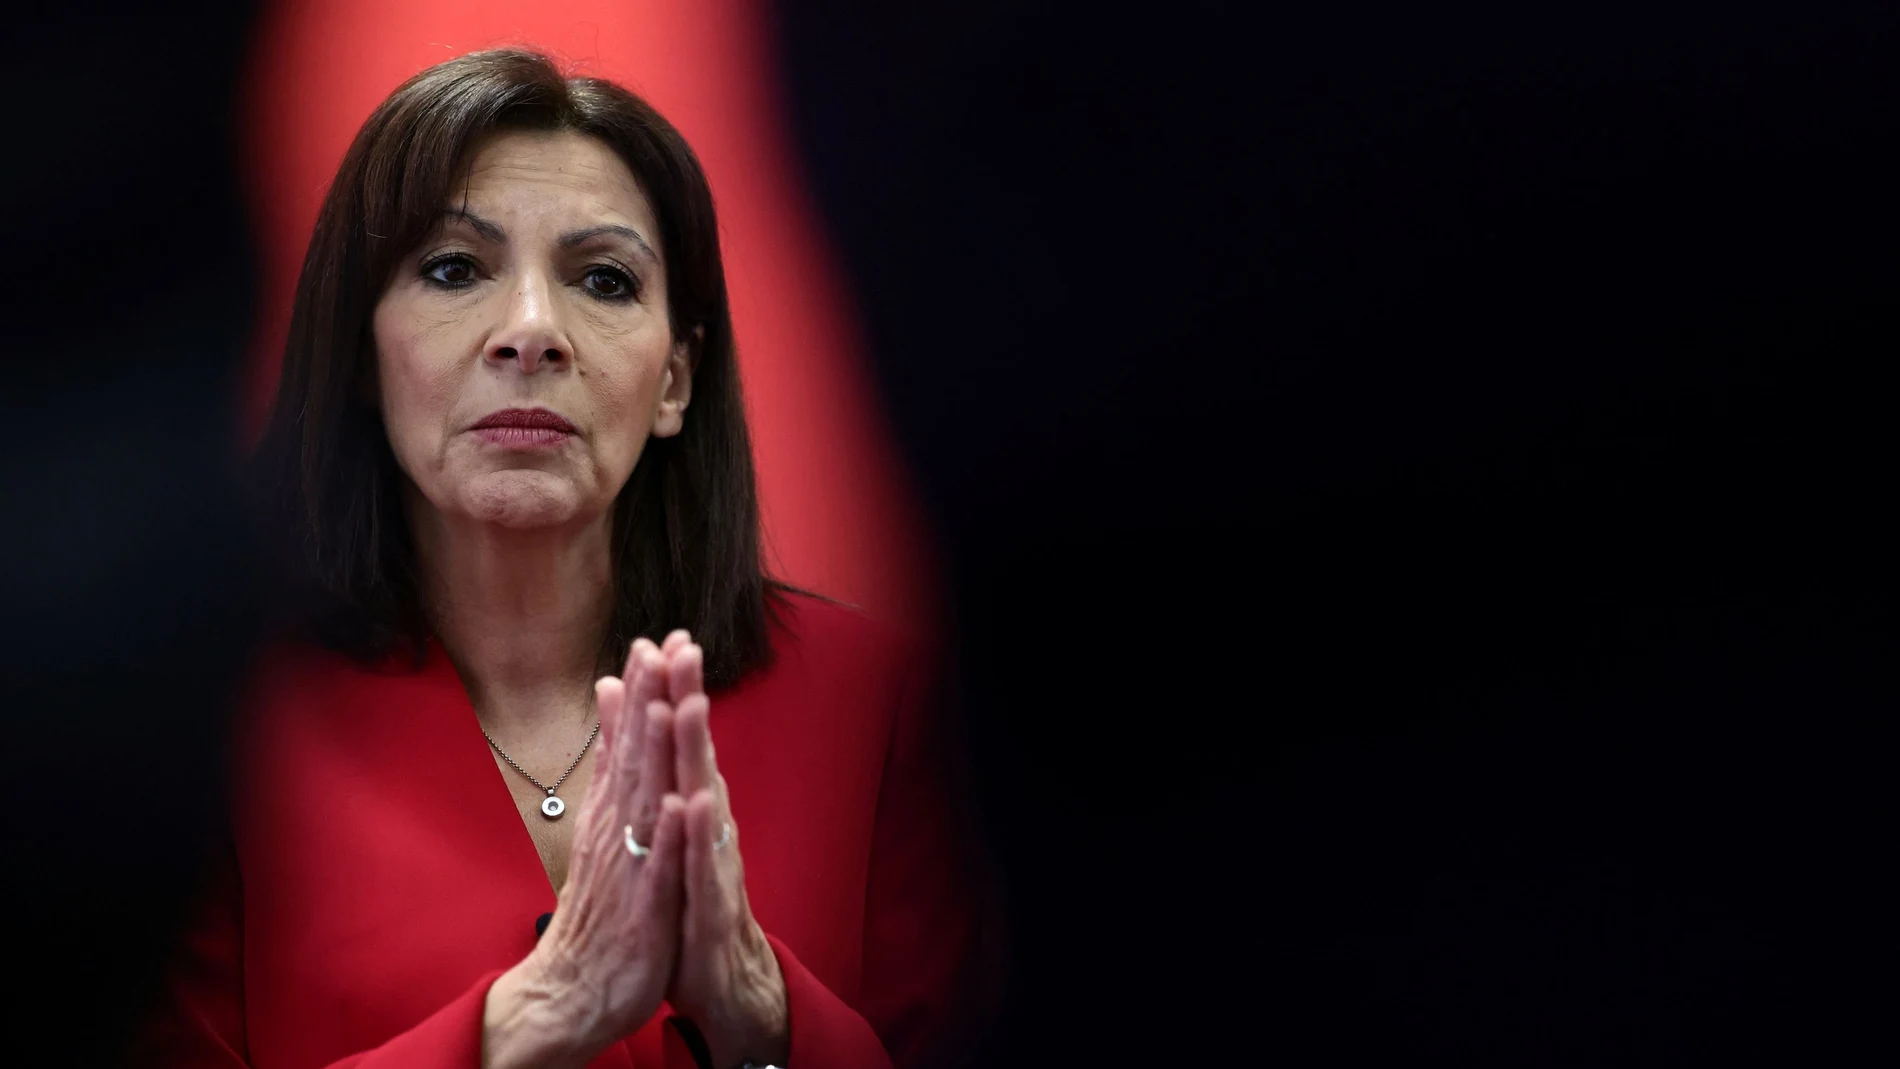 Mayor of Paris and Socialist Party (PS) presidential candidate Anne Hidalgo attends an interview with Reuters at her campaign headquarters in Paris, France, March 16, 2022. Picture taken March 16, 2022. REUTERS/Sarah Meyssonnier